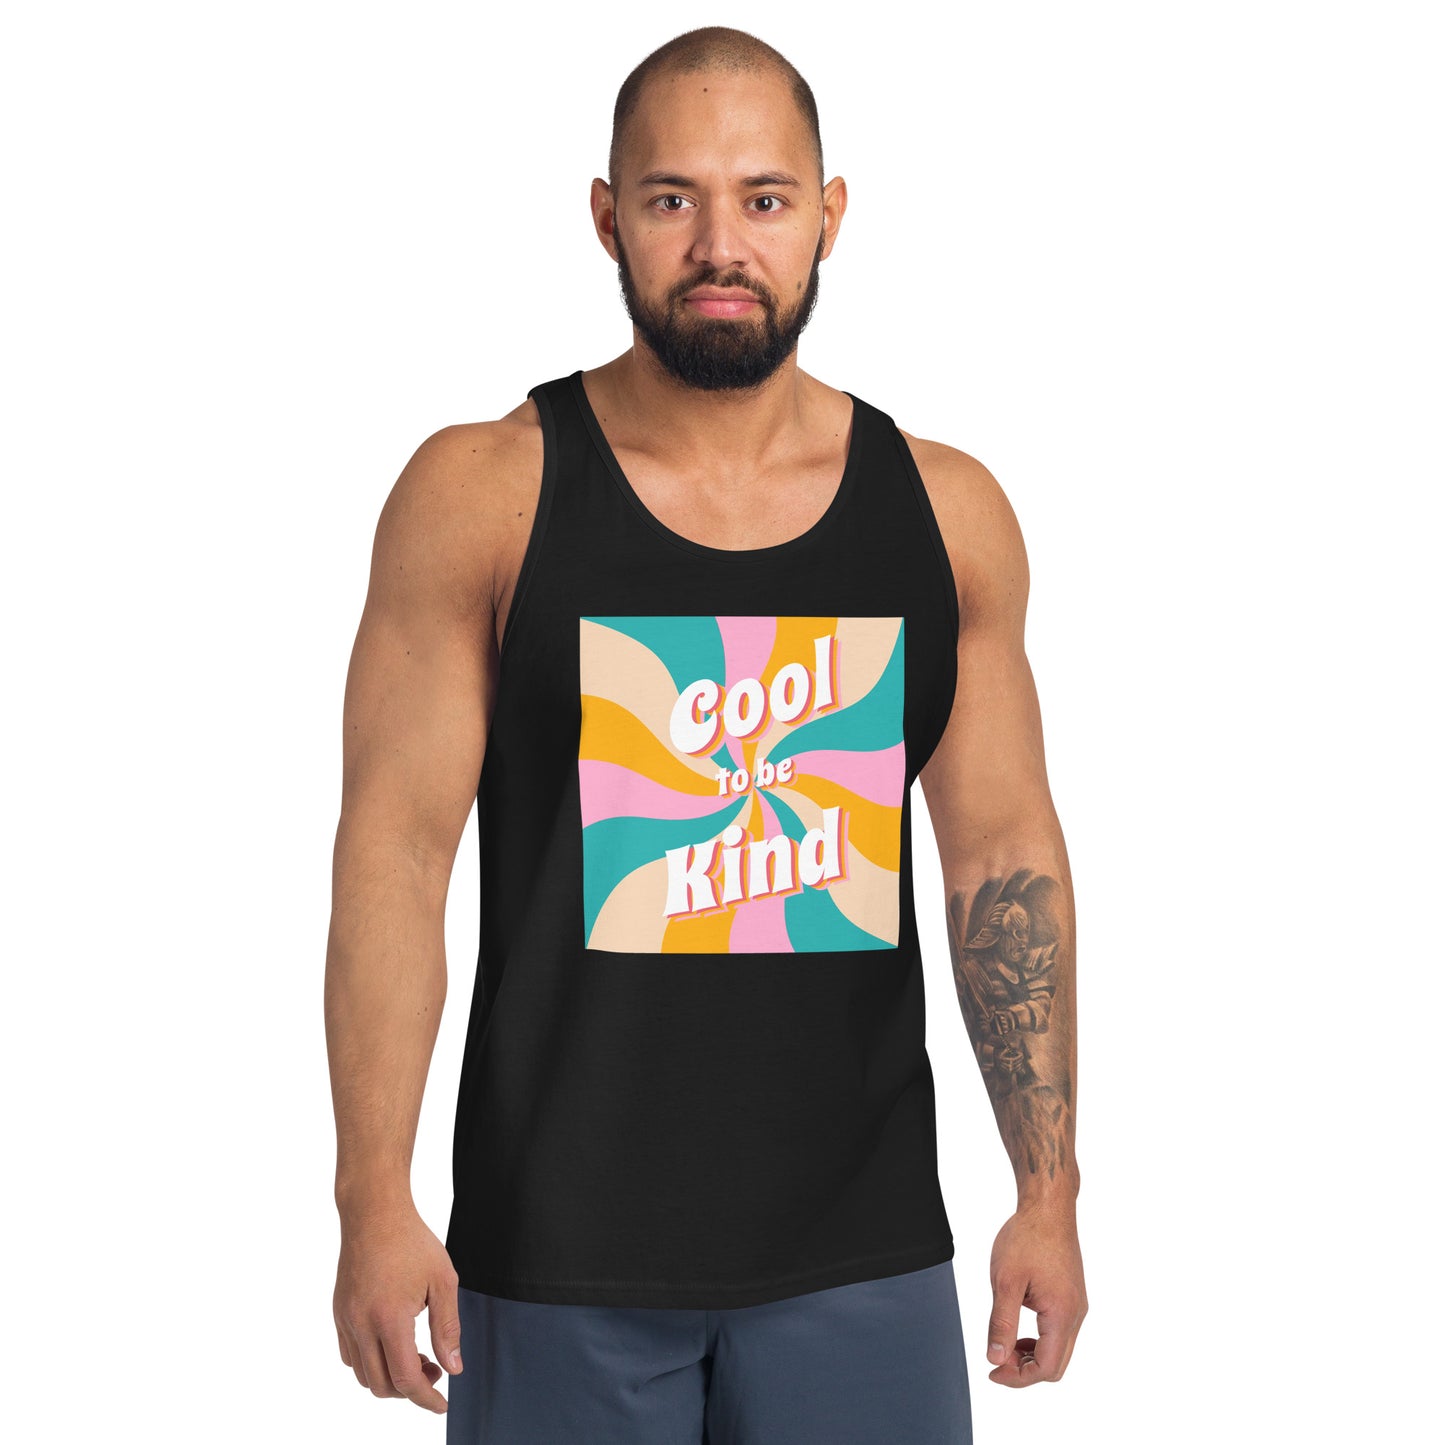 Cool to be Kind Unisex Tank Top